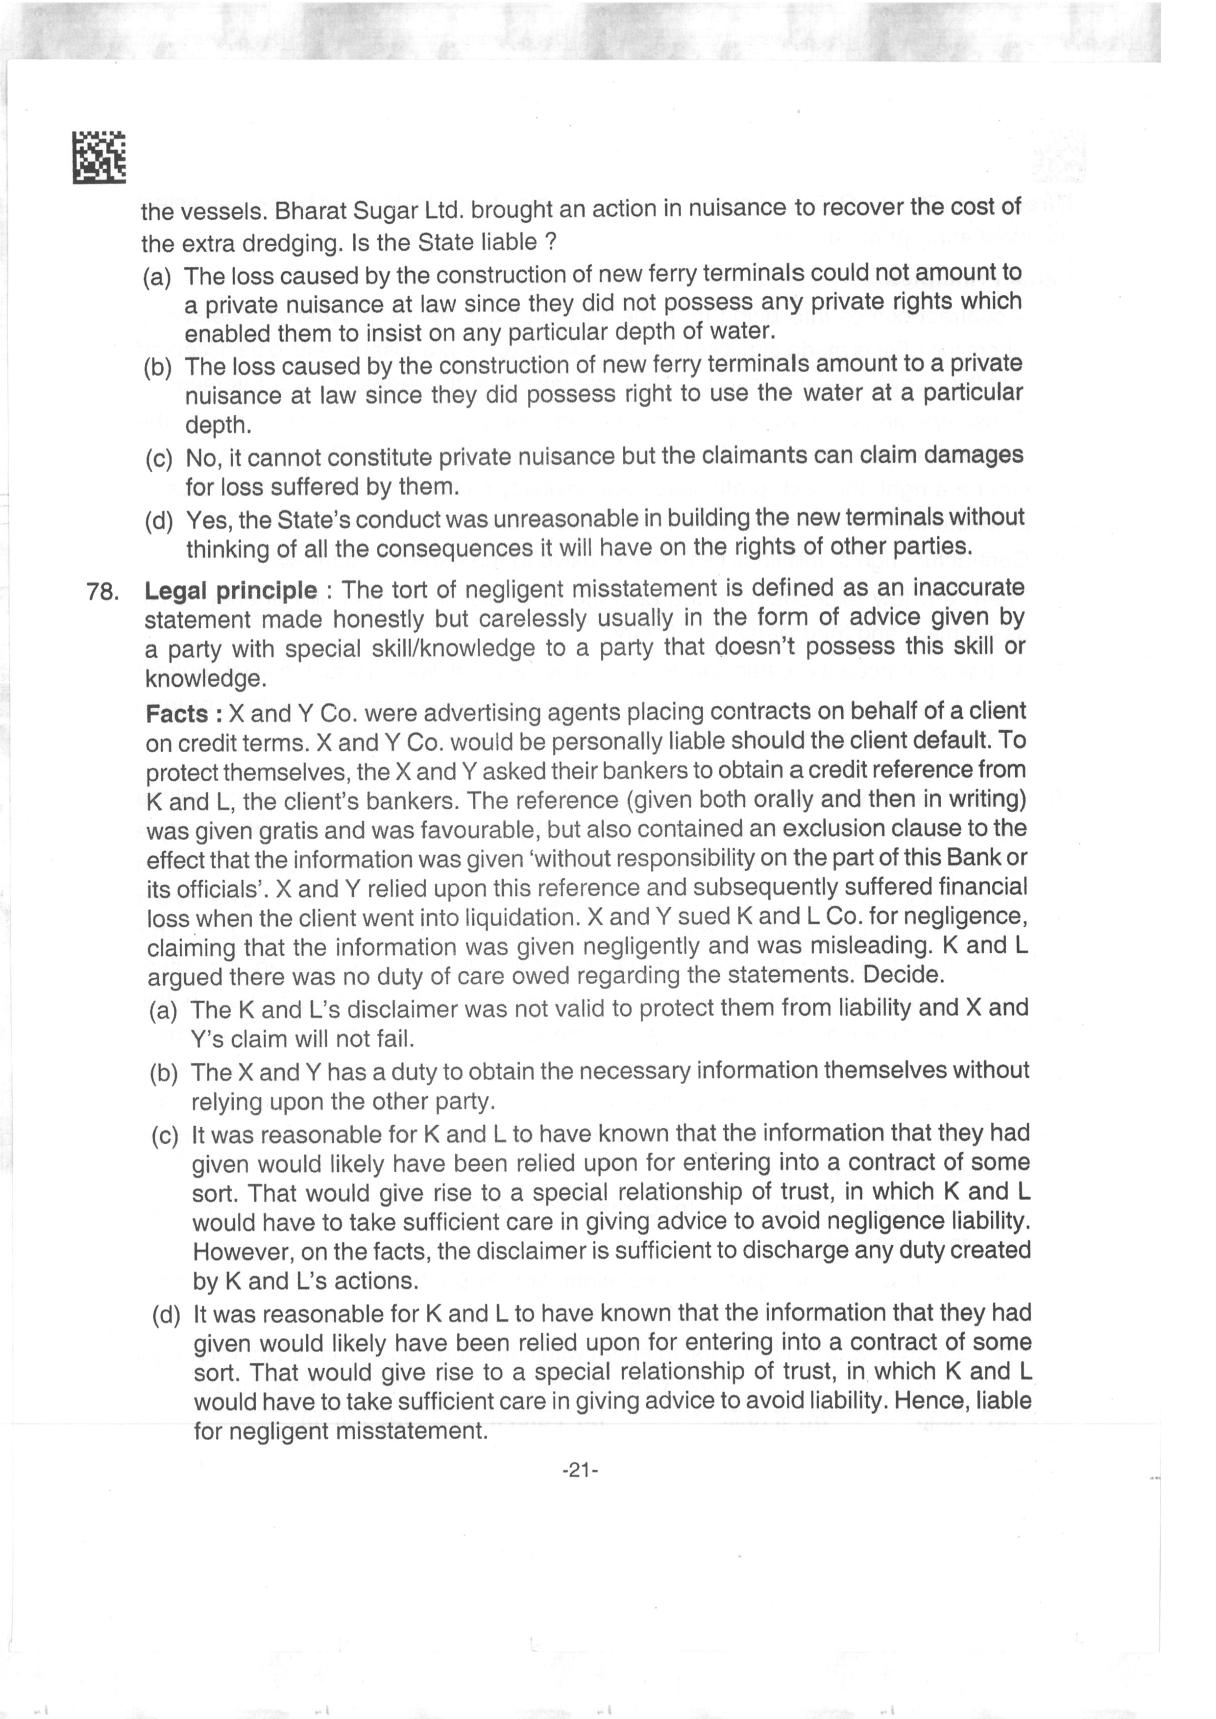 AILET 2019 Question Paper for BA LLB - Page 21